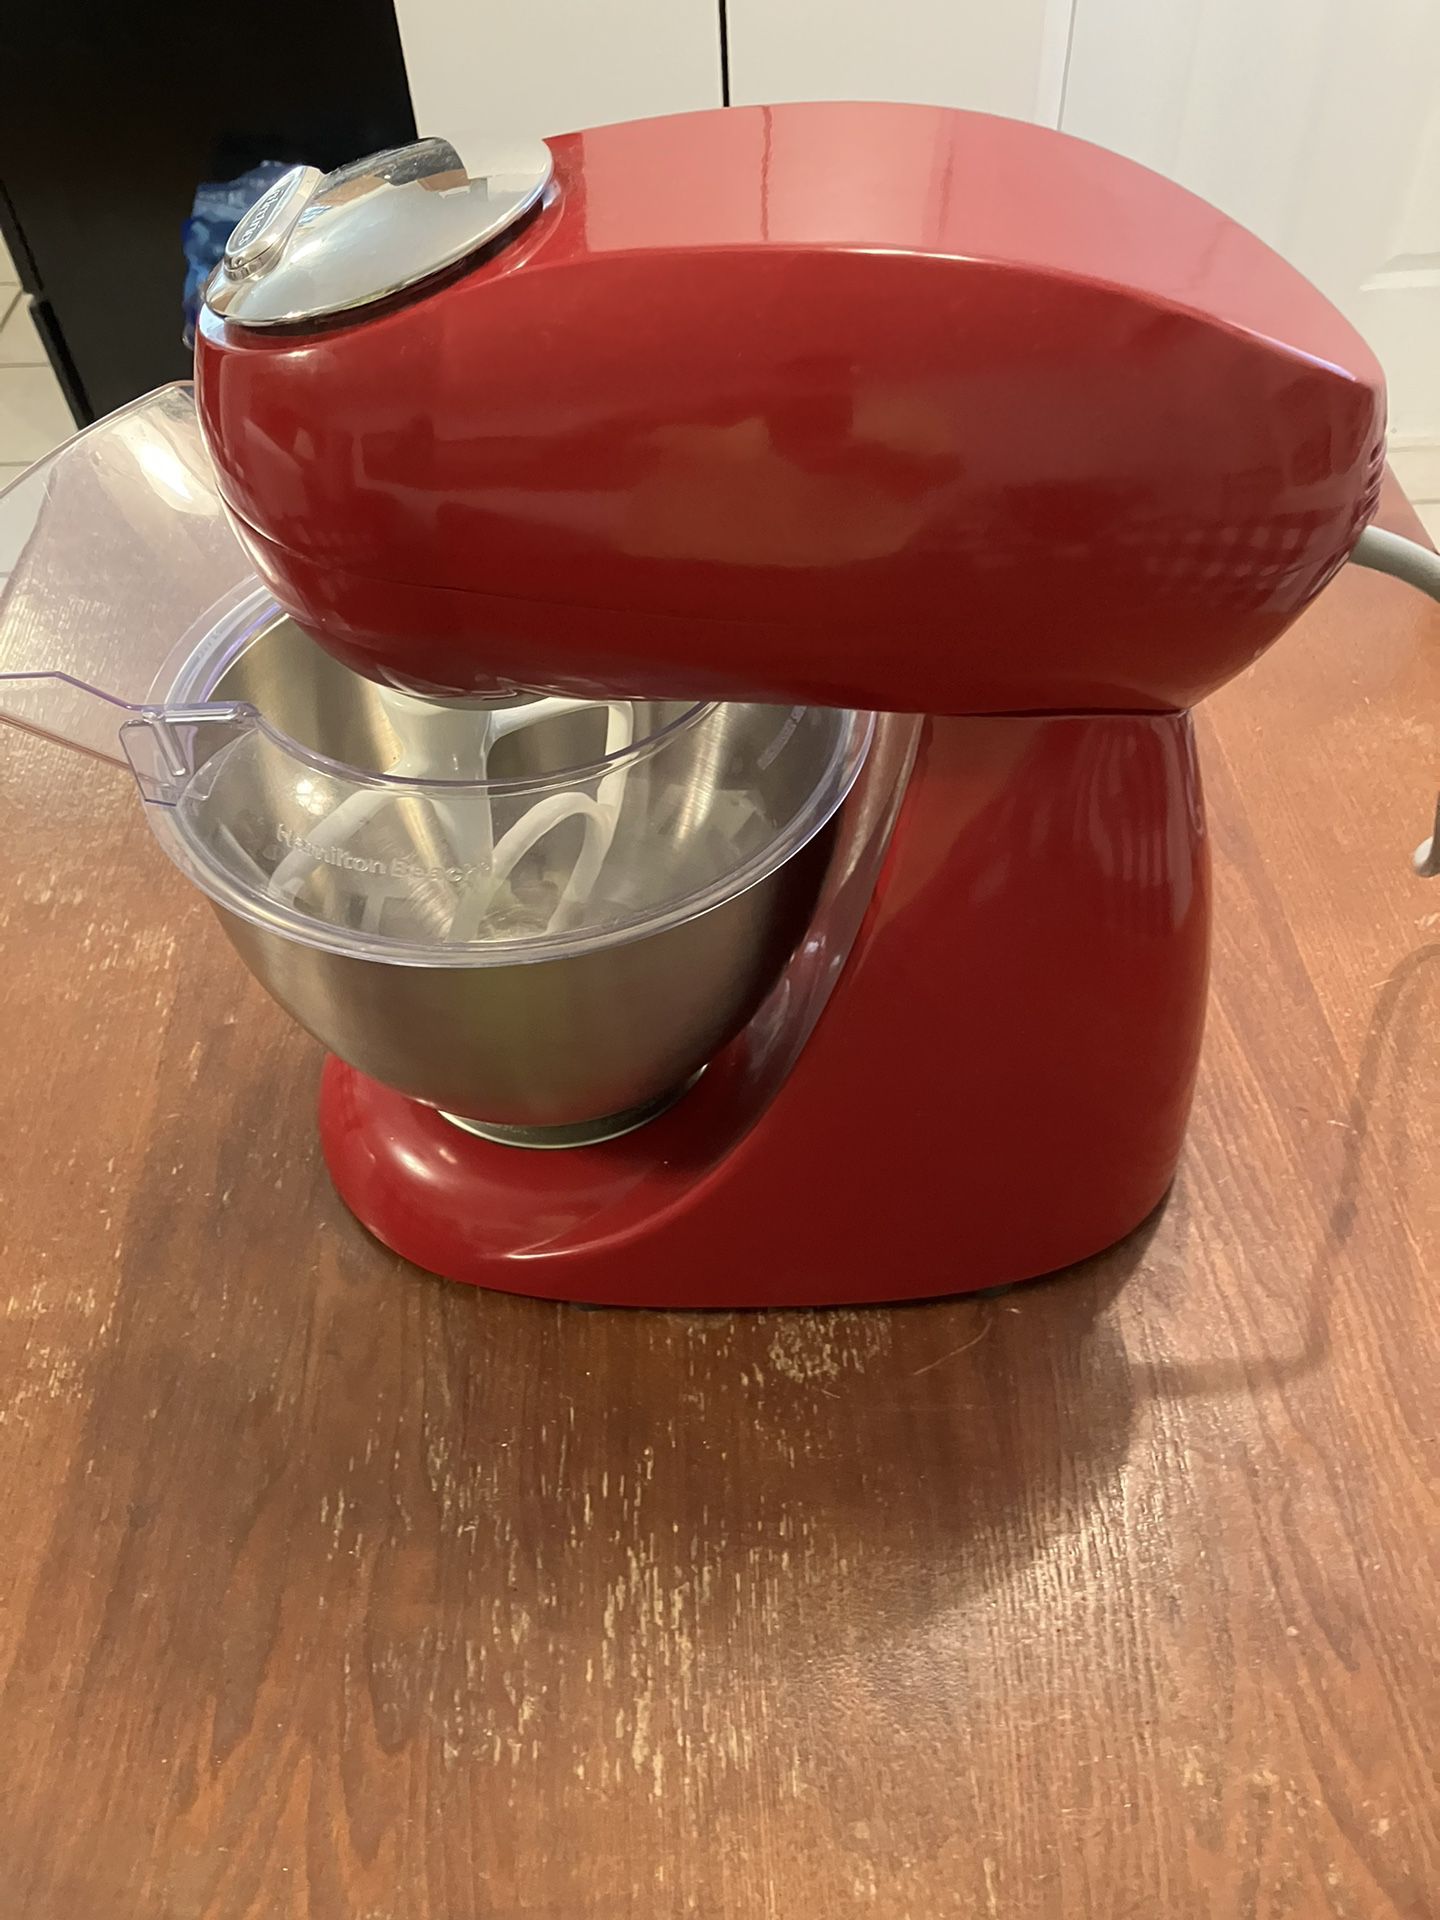 RED Hamilton Beach stand mixer with bowl, dough hook, paddle and guide to add ingredients without making a mess.